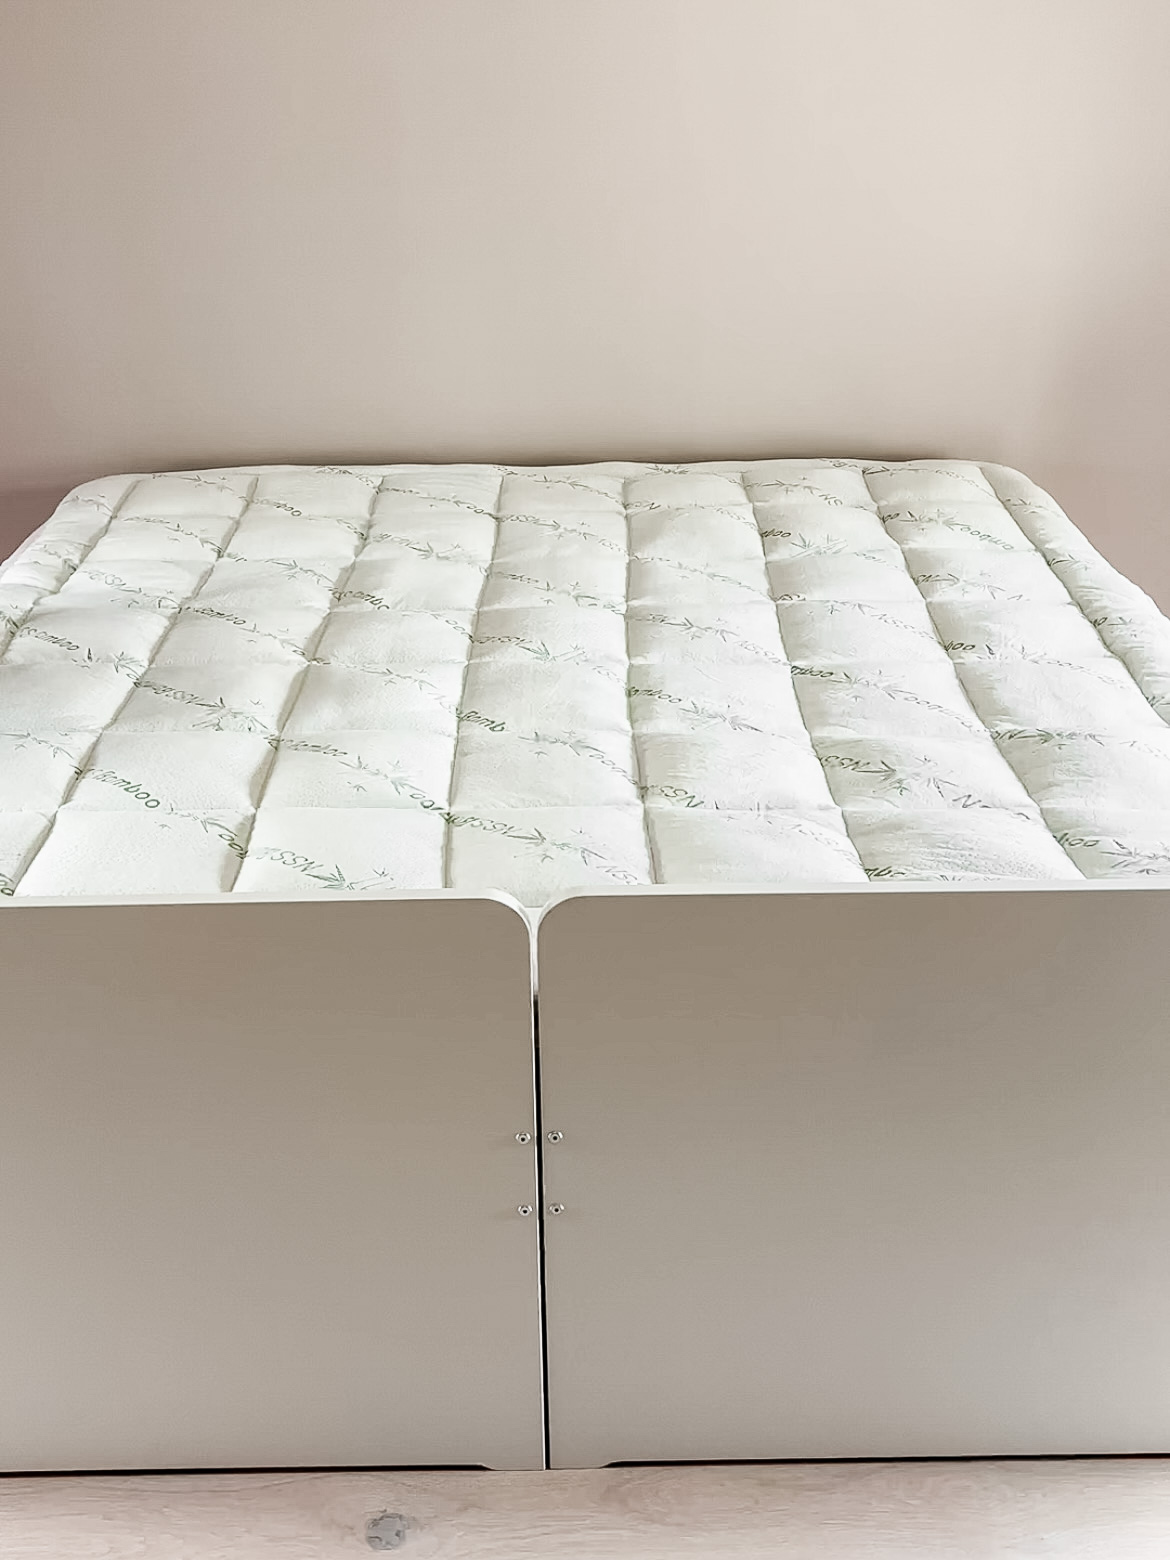 A bed with a mattress cover on top.